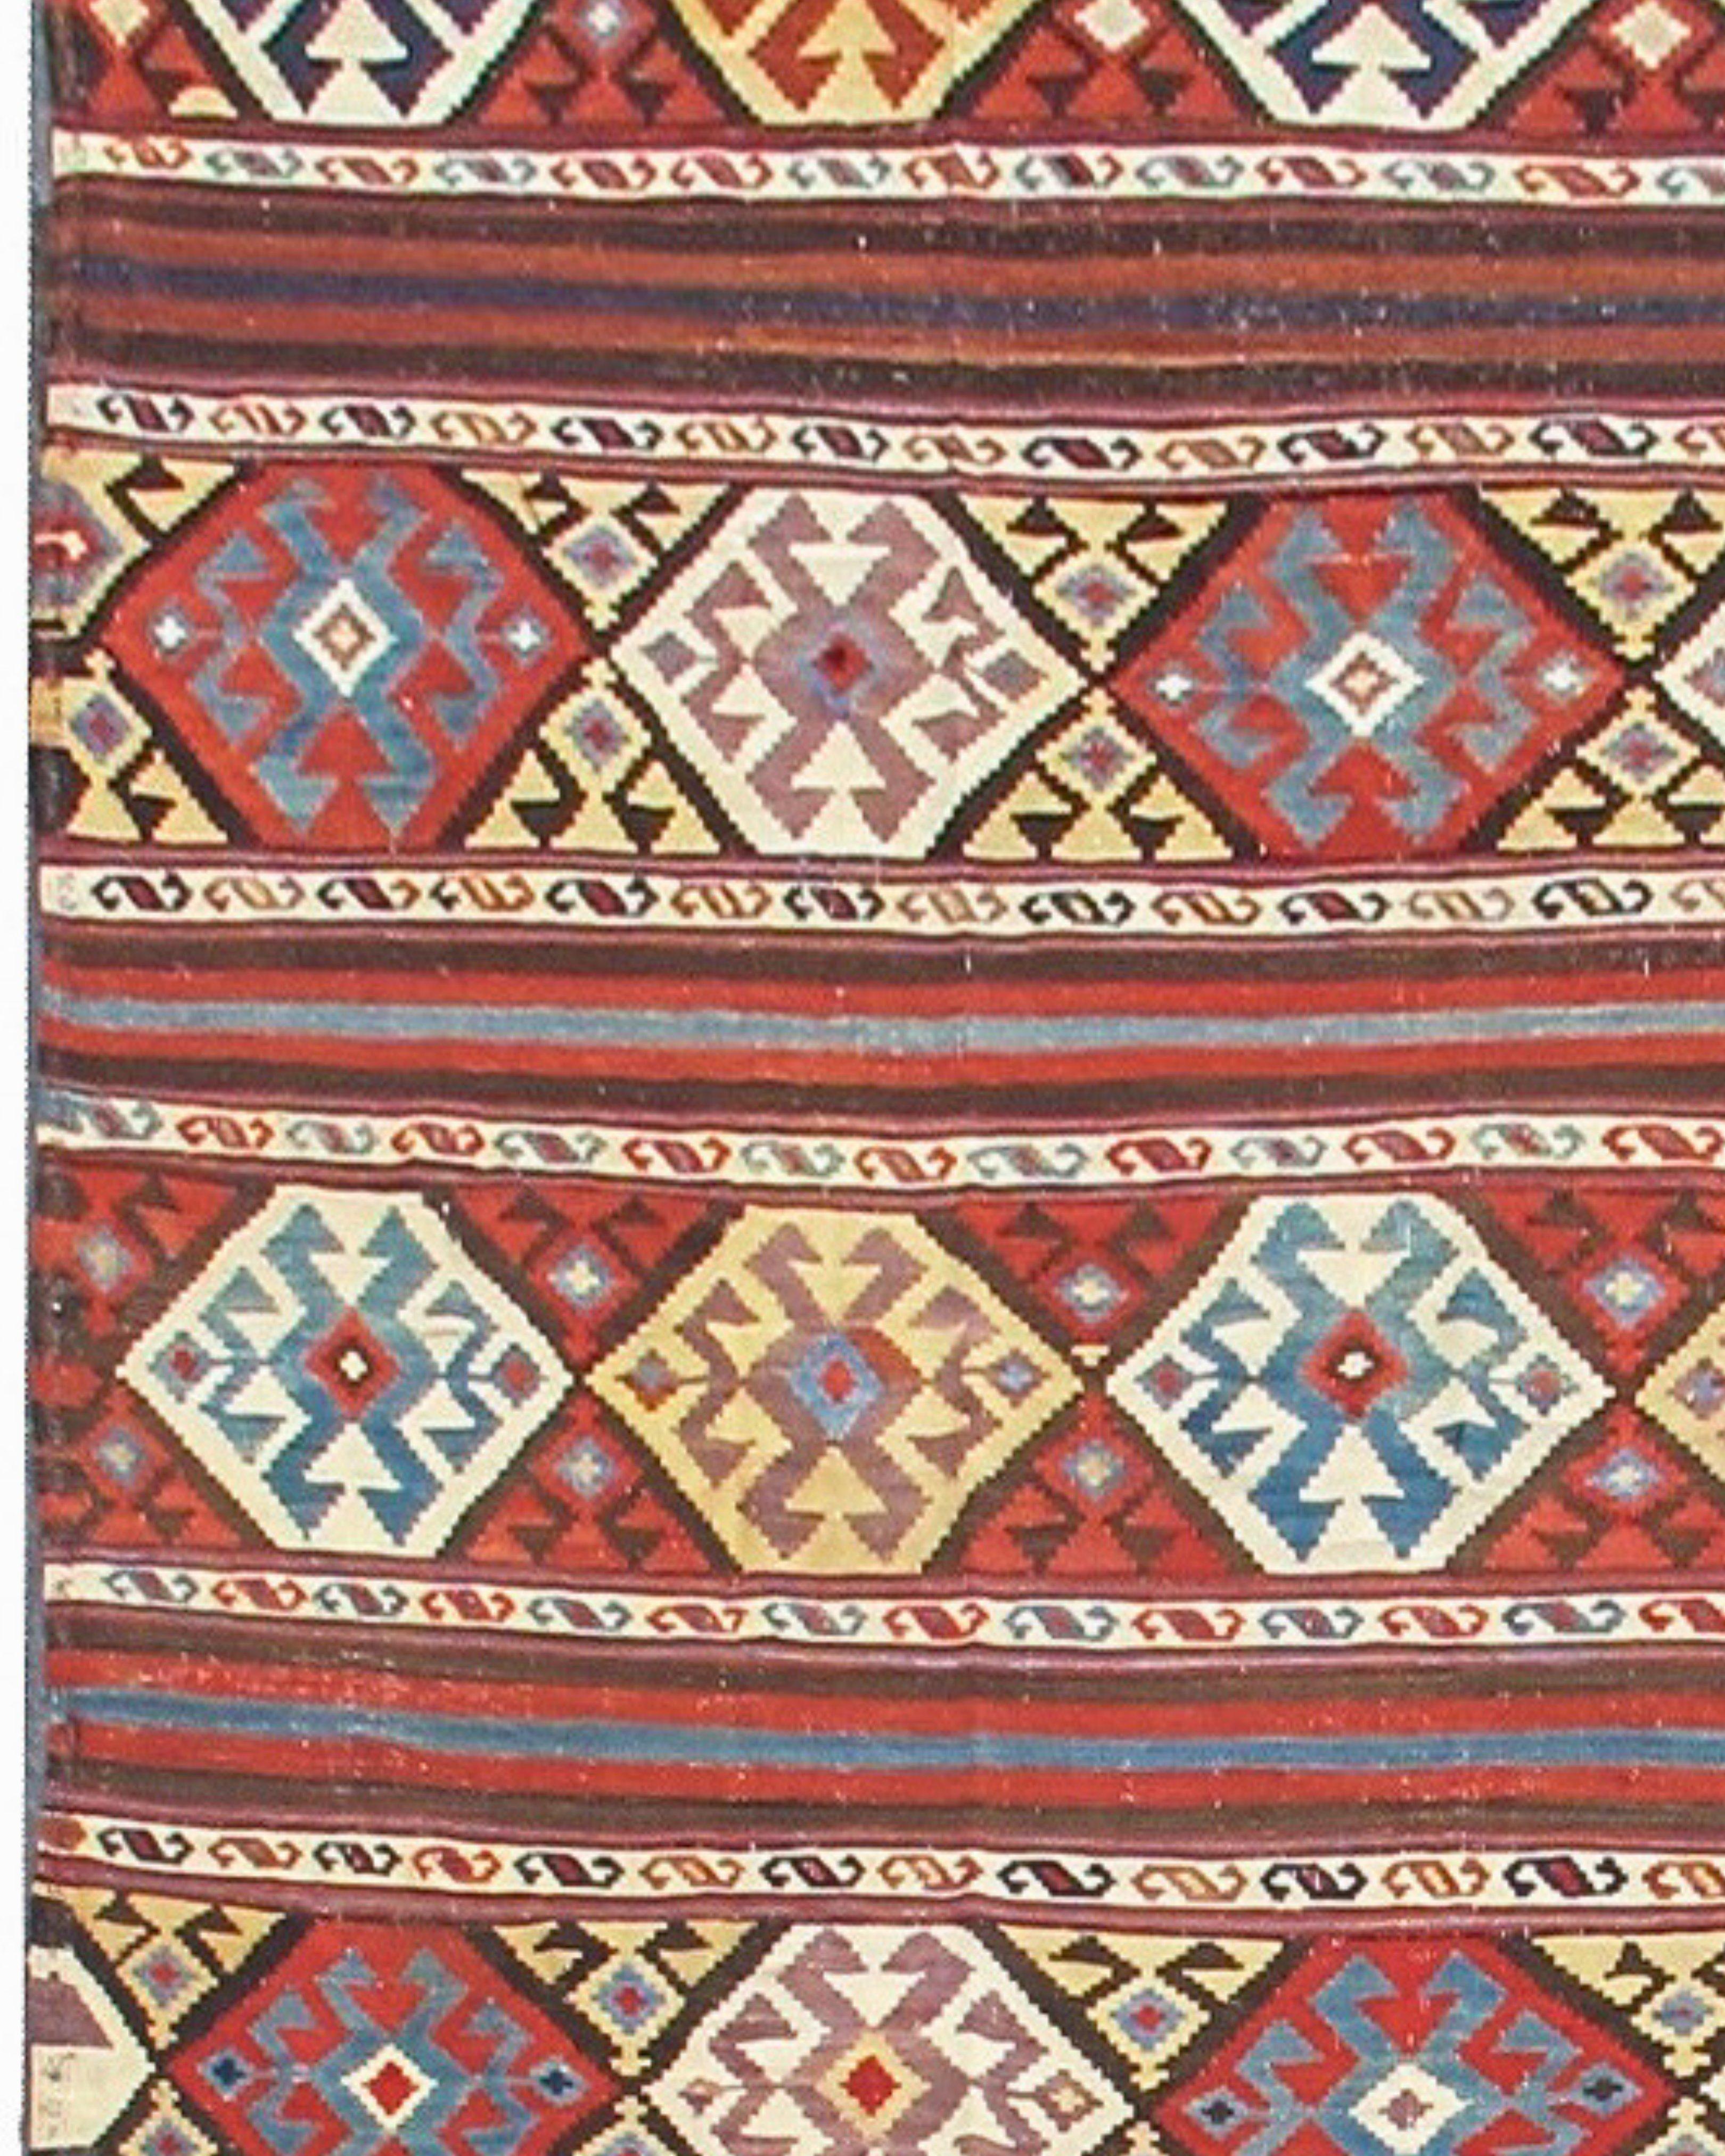 Hand-Knotted Antique Caucasian Shahsevan Kilim Rug, c. 1900 For Sale